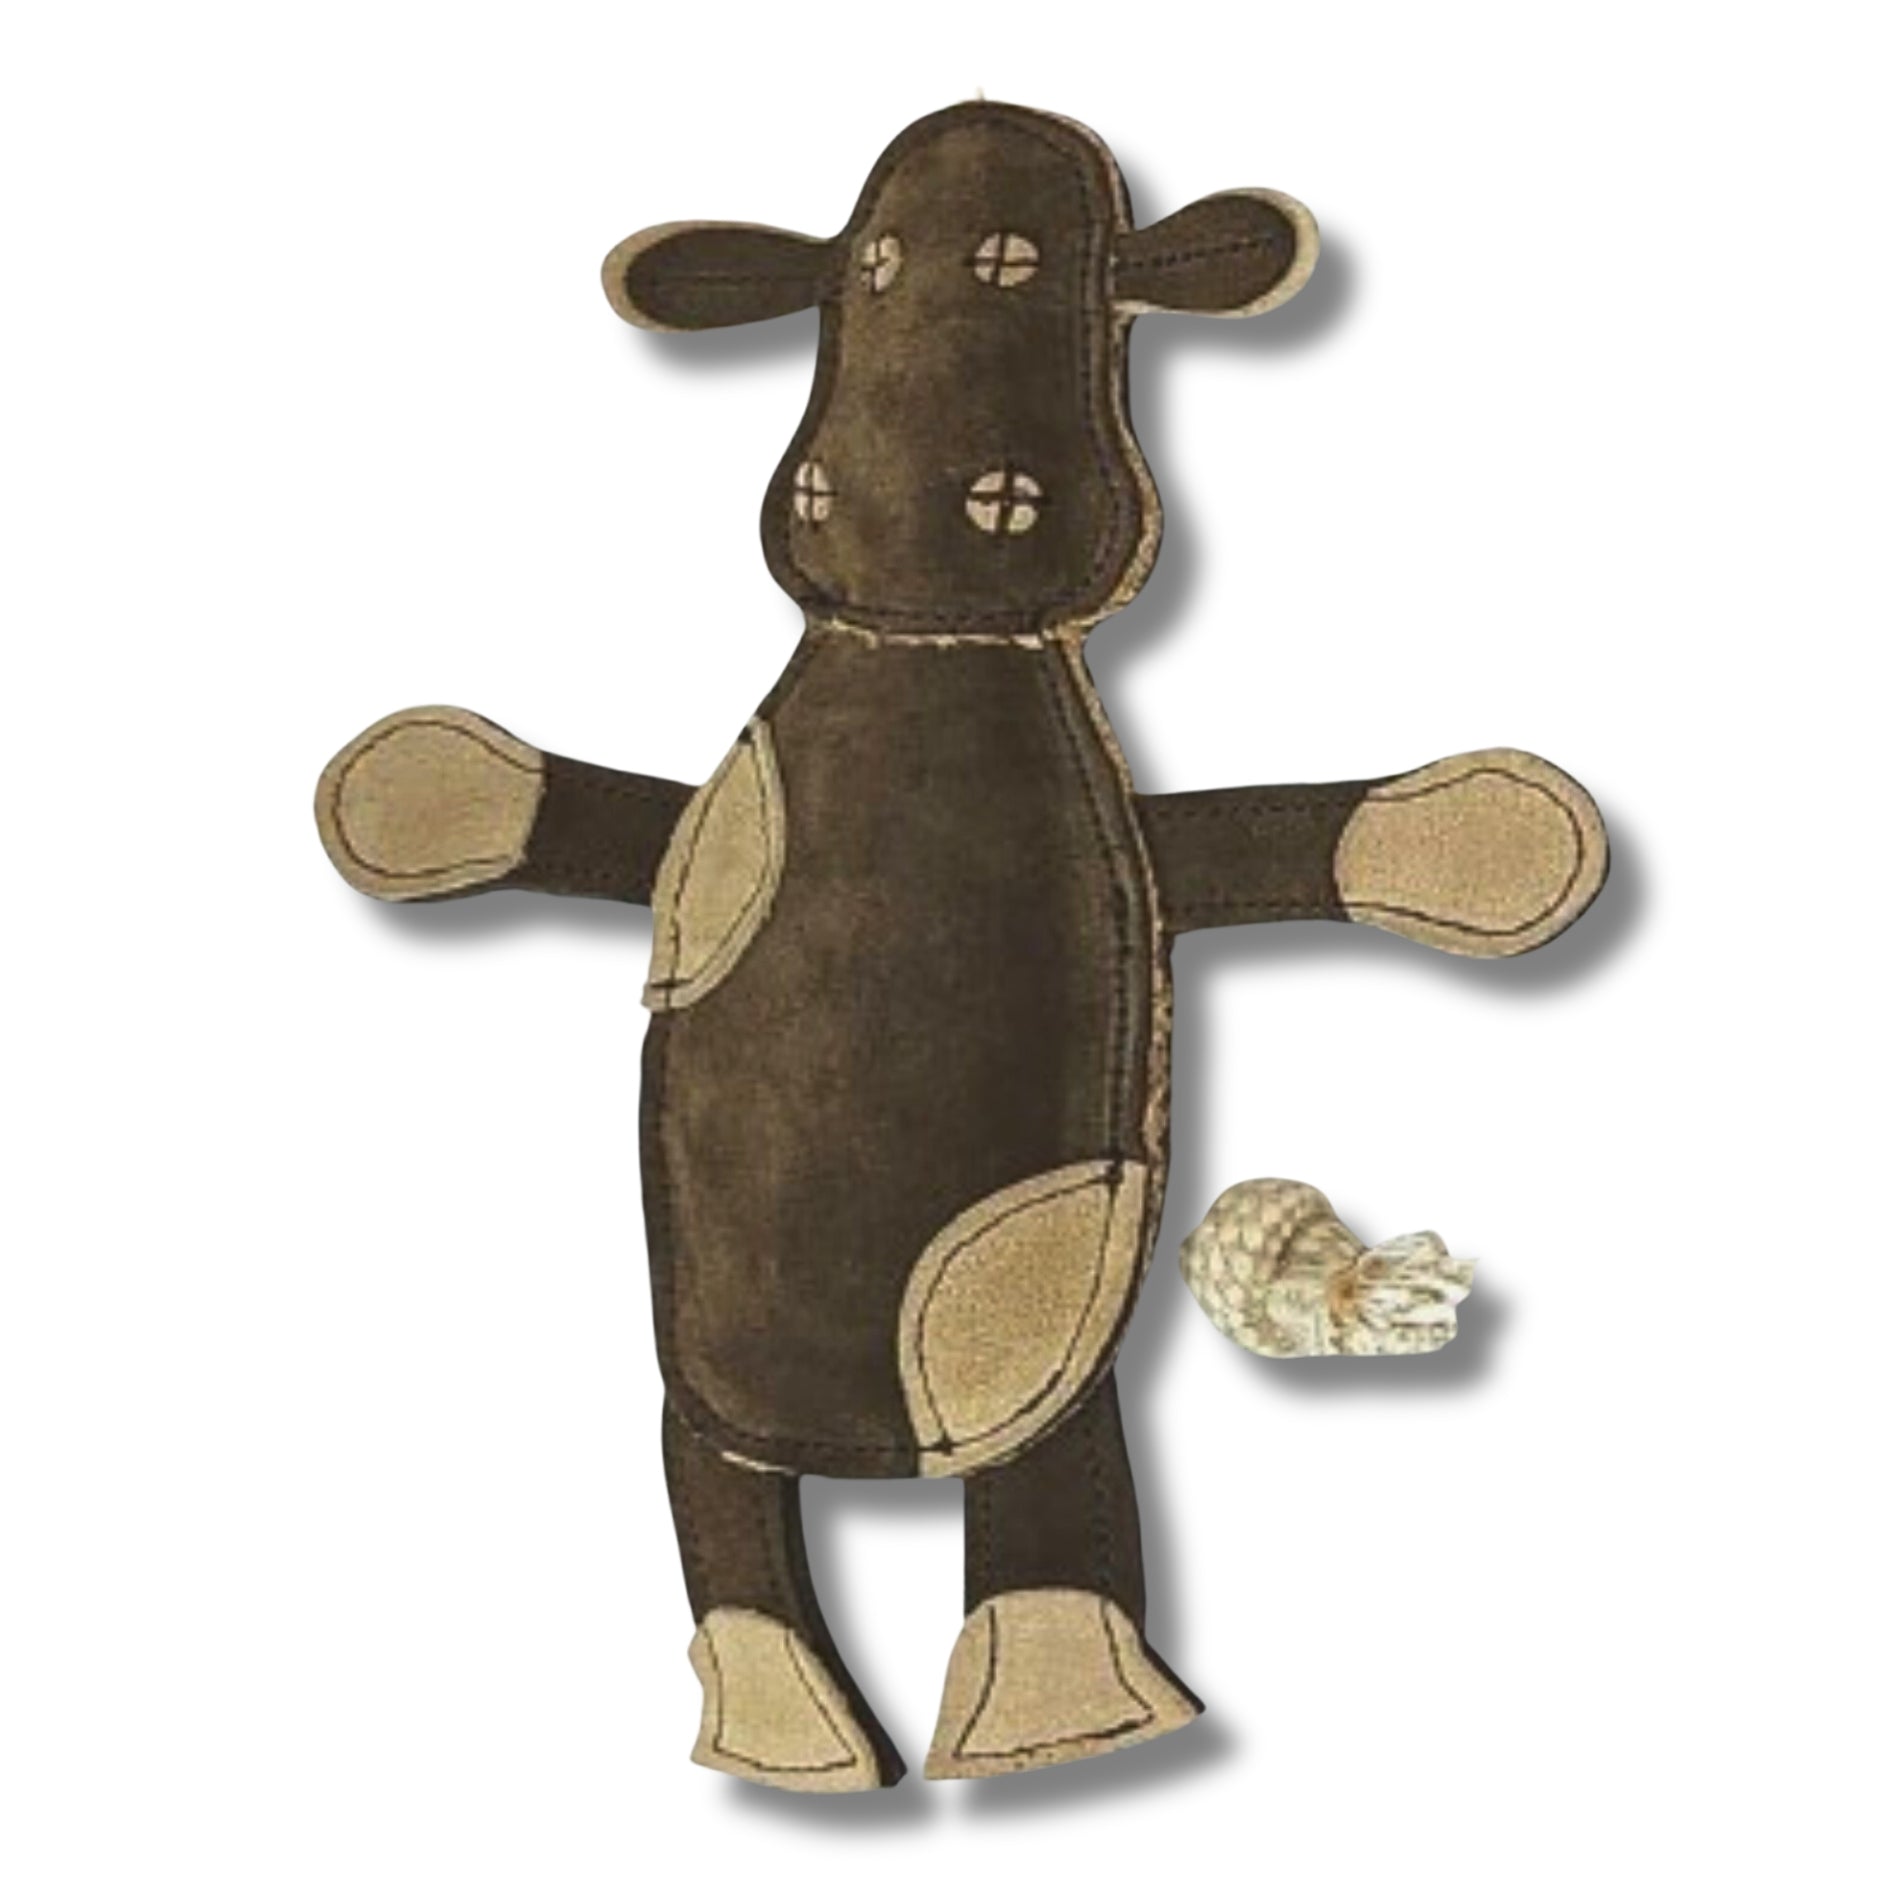 A cute Cheryl the Cow toy by Georgie Paws on a white background.